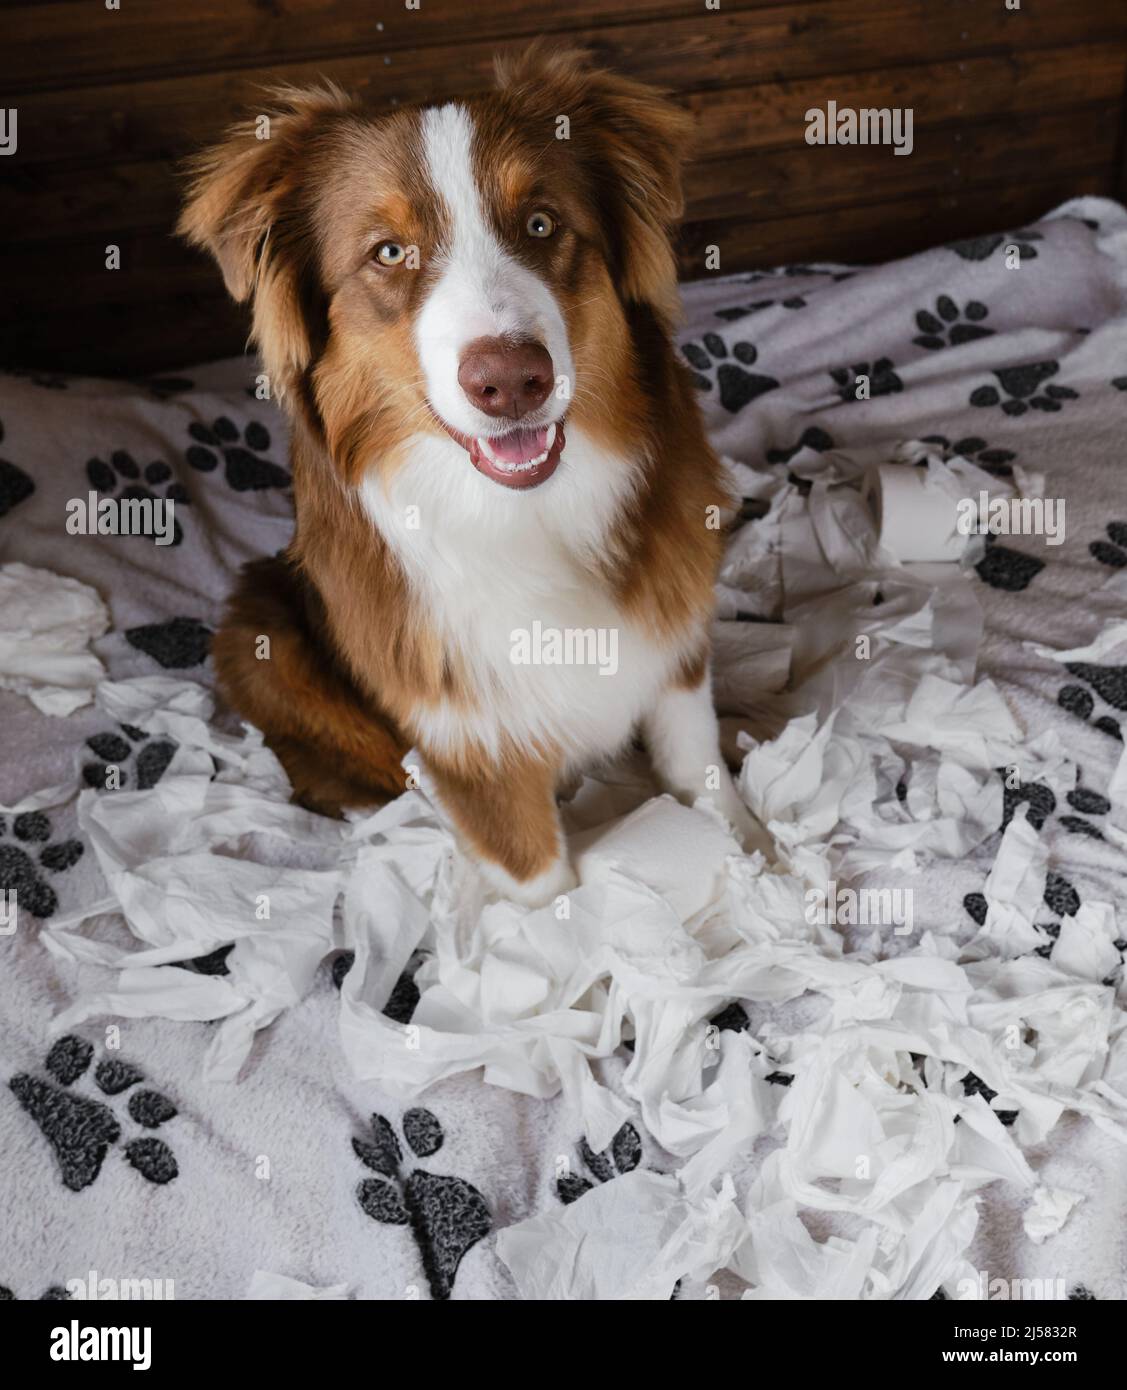 Aussie is young crazy dog making mess rejoicing. Dog is alone at home entertaining himself by eating toilet paper. Charming brown Australian Shepherd Stock Photo